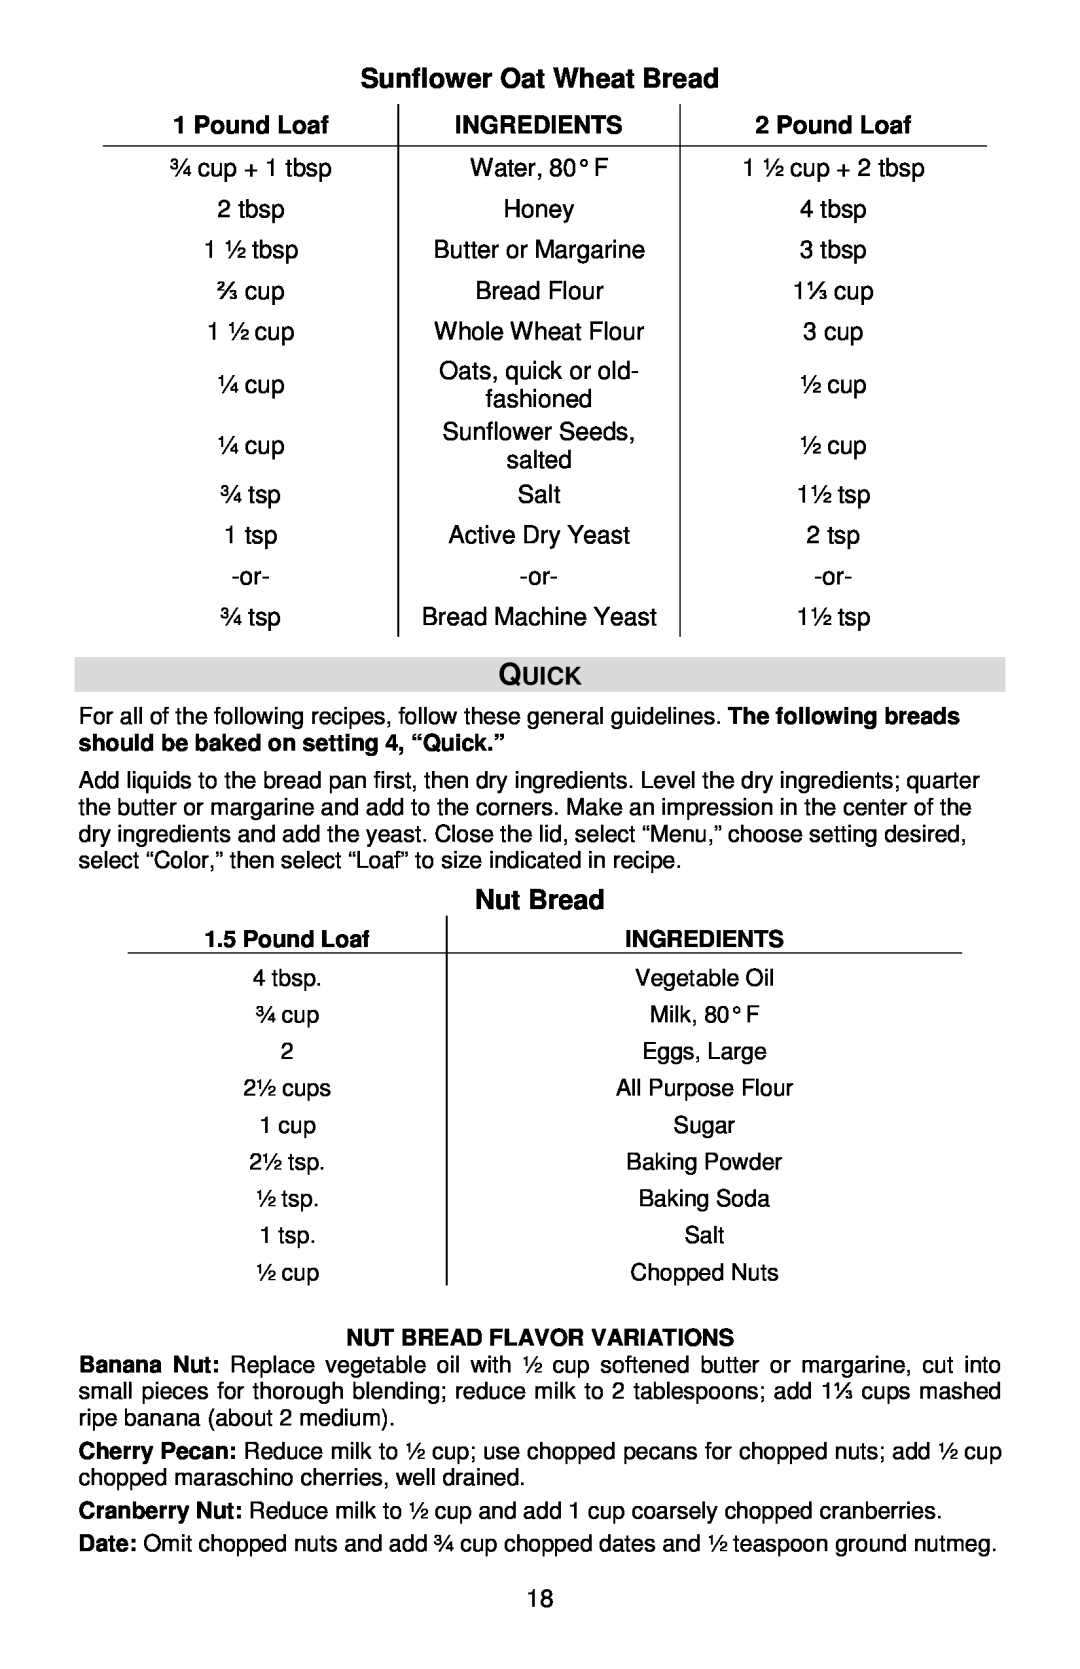 West Bend L5811A, 41400 instruction manual Sunflower Oat Wheat Bread, Nut Bread, Quick, Pound Loaf, Ingredients 